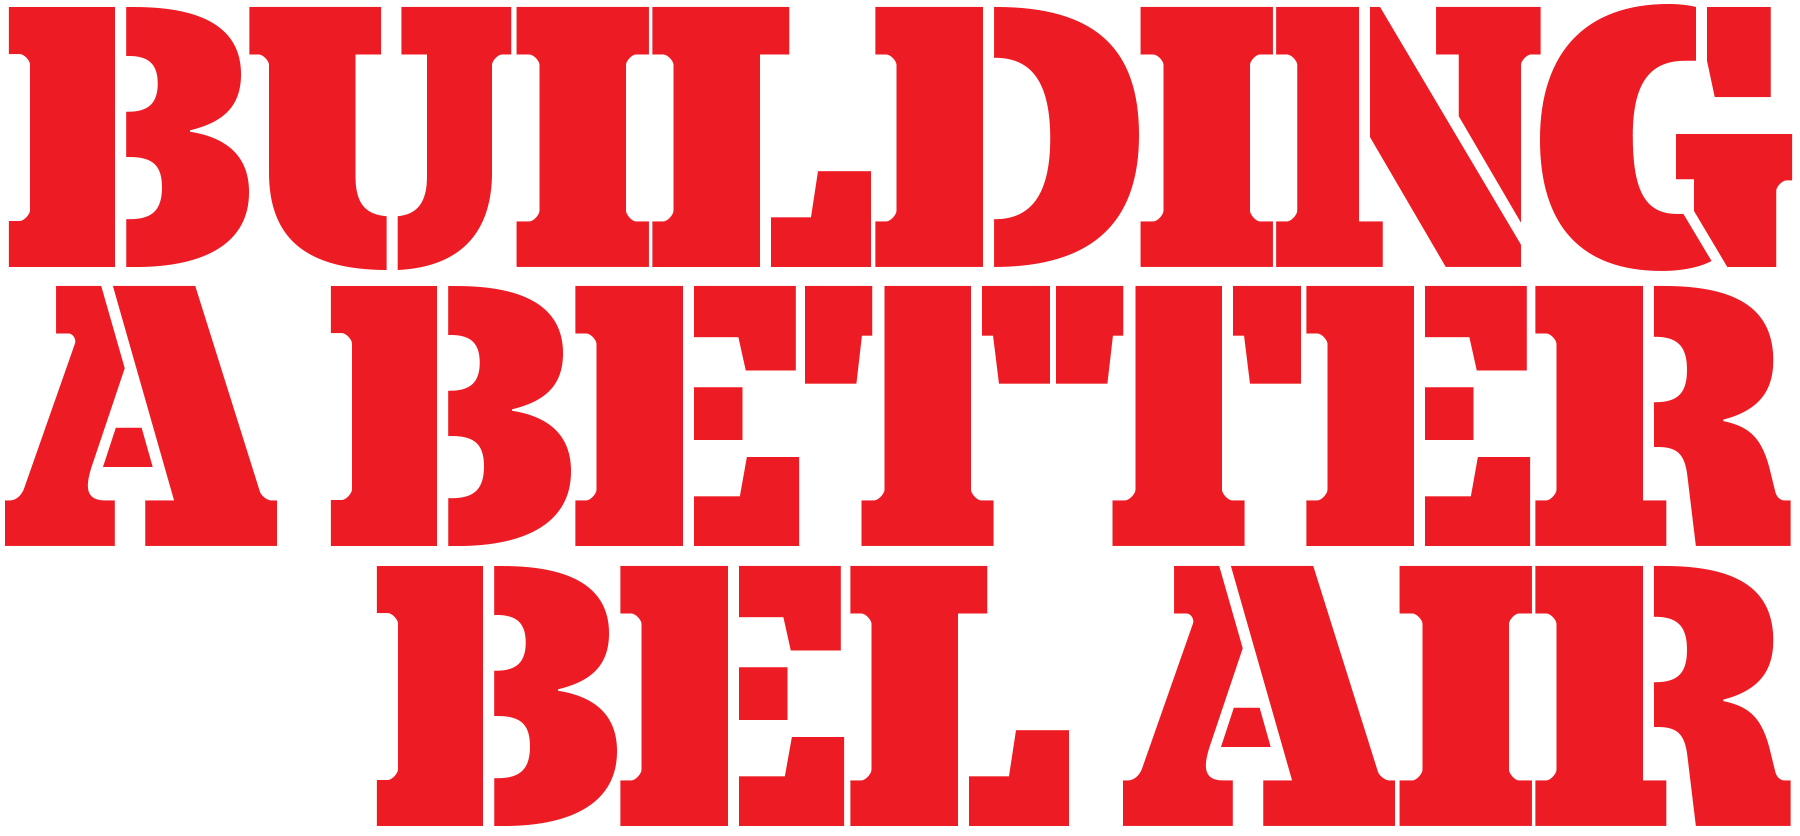 Building a Better Bel Air typographic title in red